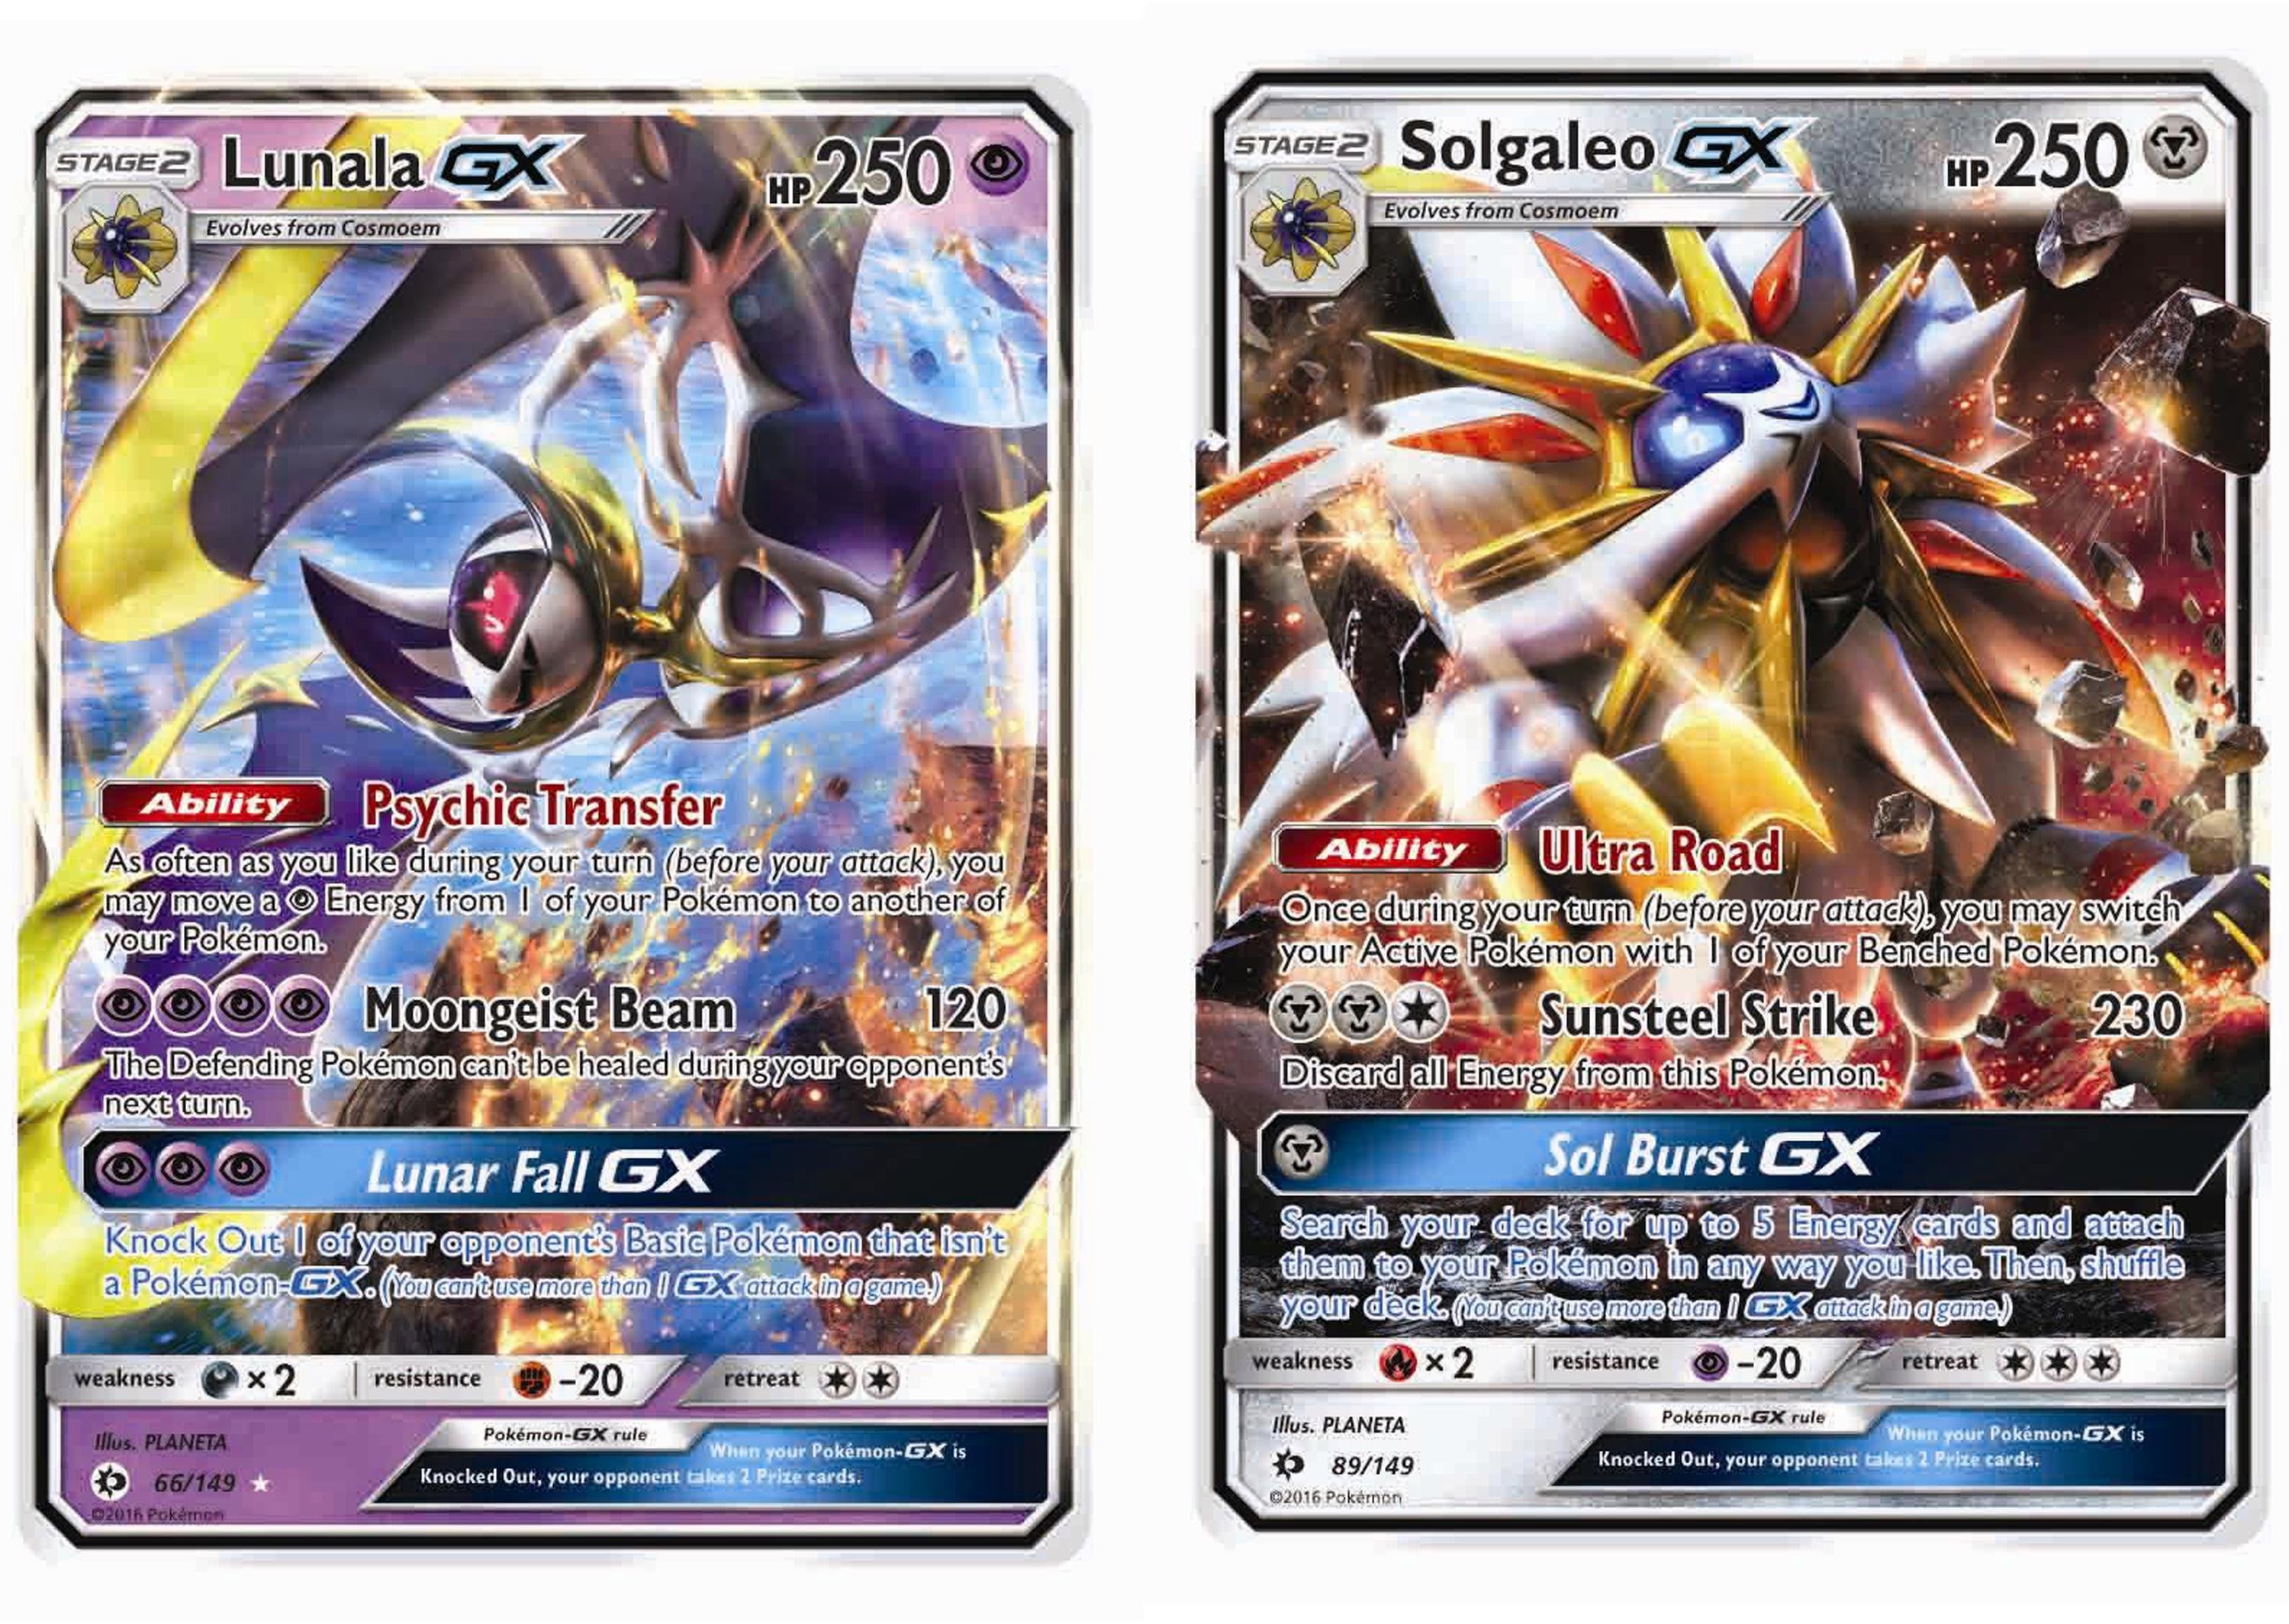 Pokemon Trading Card Game Sun And Moon Set Revealed